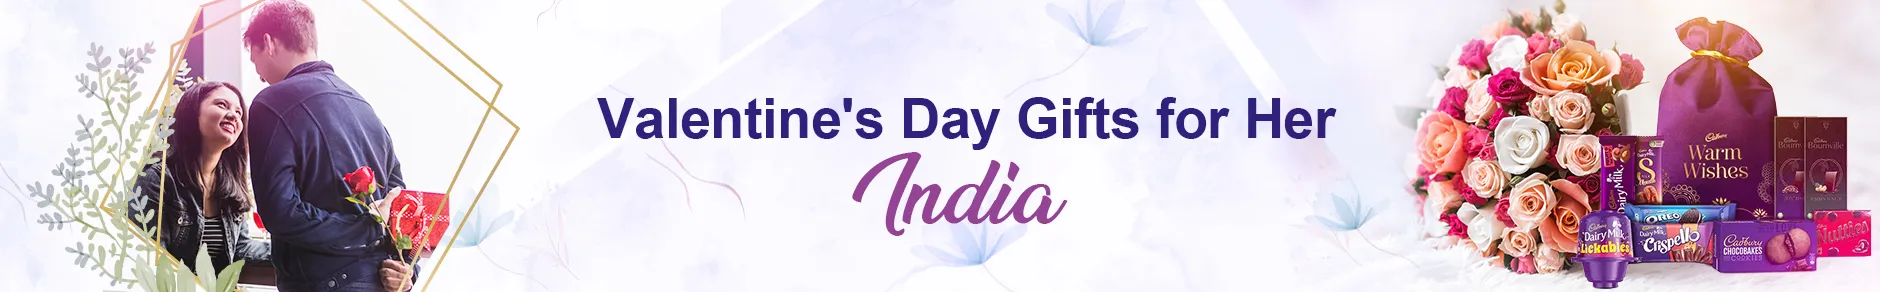 Gifts for Women in Ramgarh | Send Flowers, Cake & Gift Hampers in 2 Hours | Same Day Delivery, Free Shipping